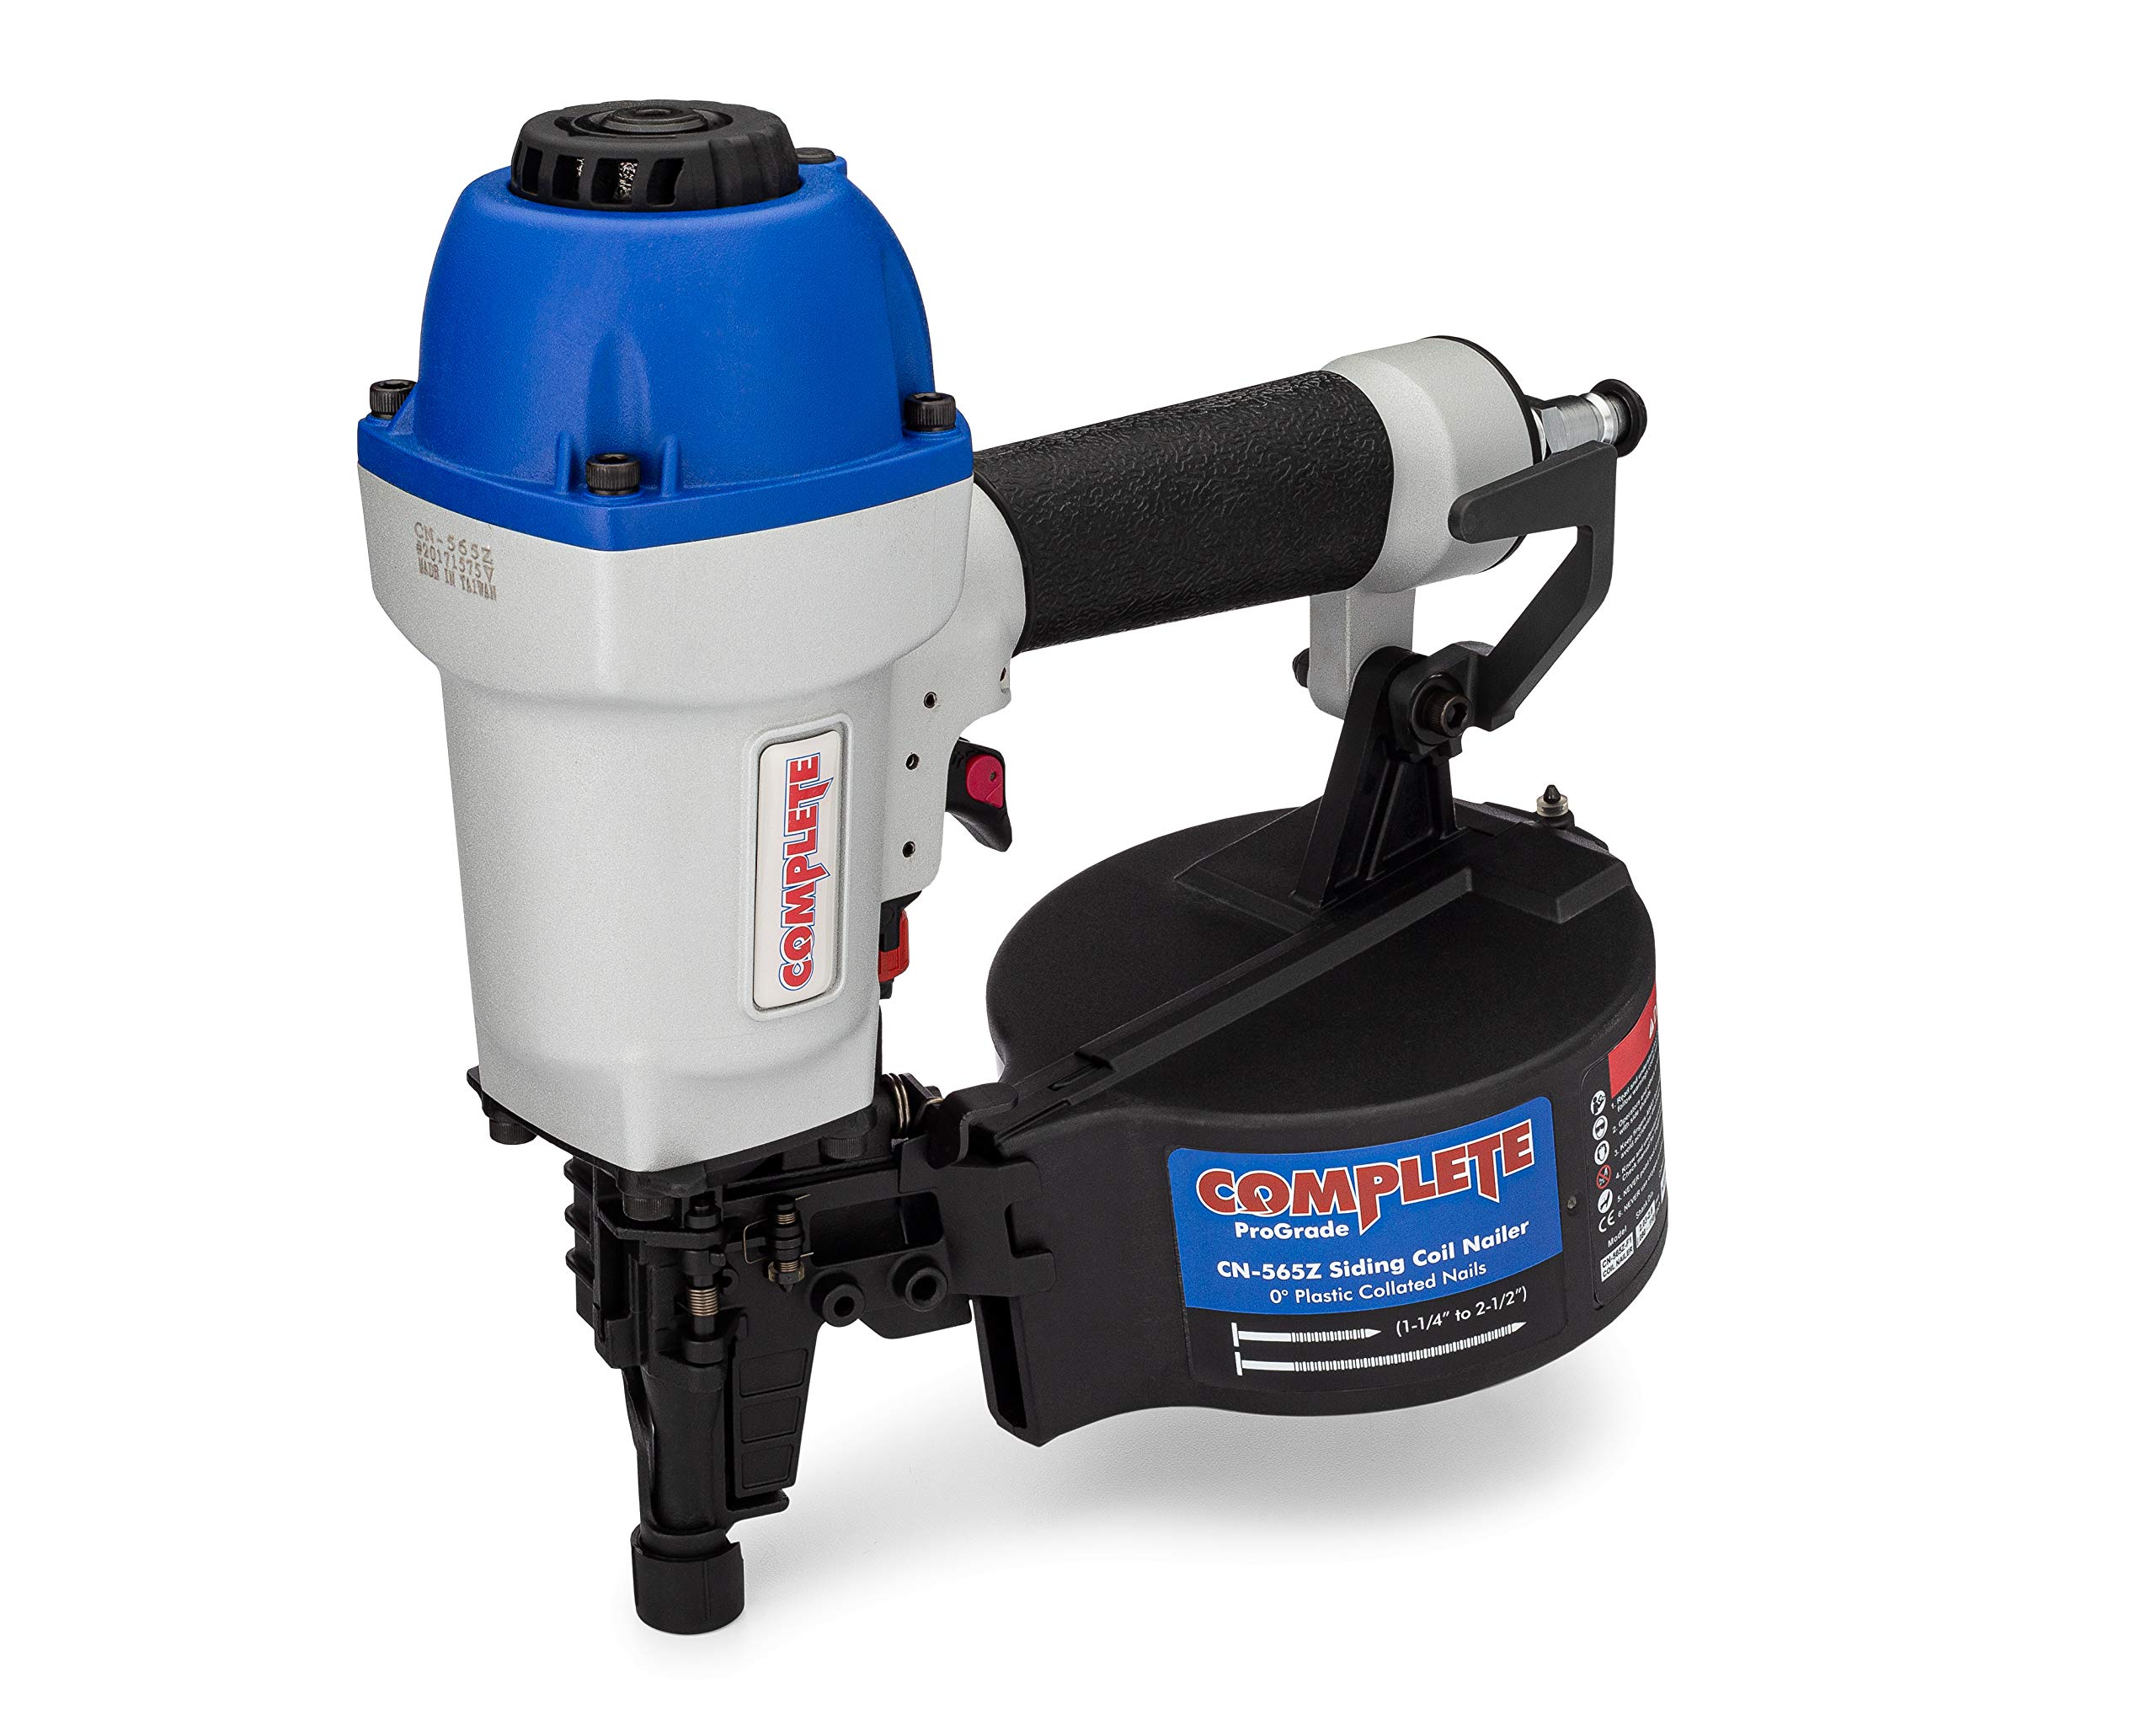 Looking to Buy The Freeman PCN65 Coil Siding Nailer. Read This First